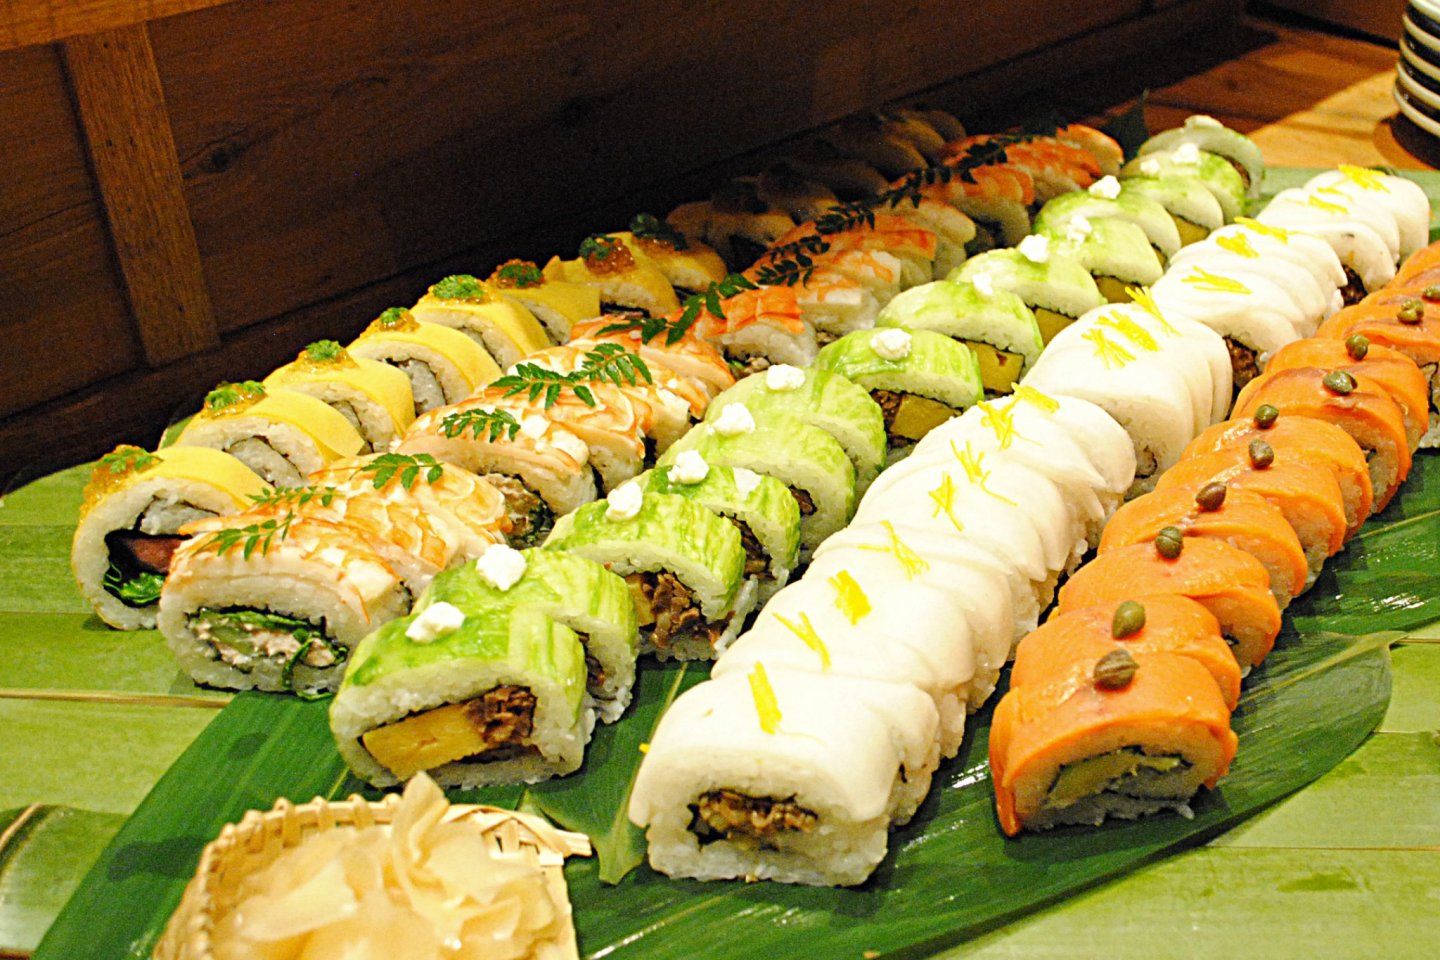 Brightly colored sushi rolls